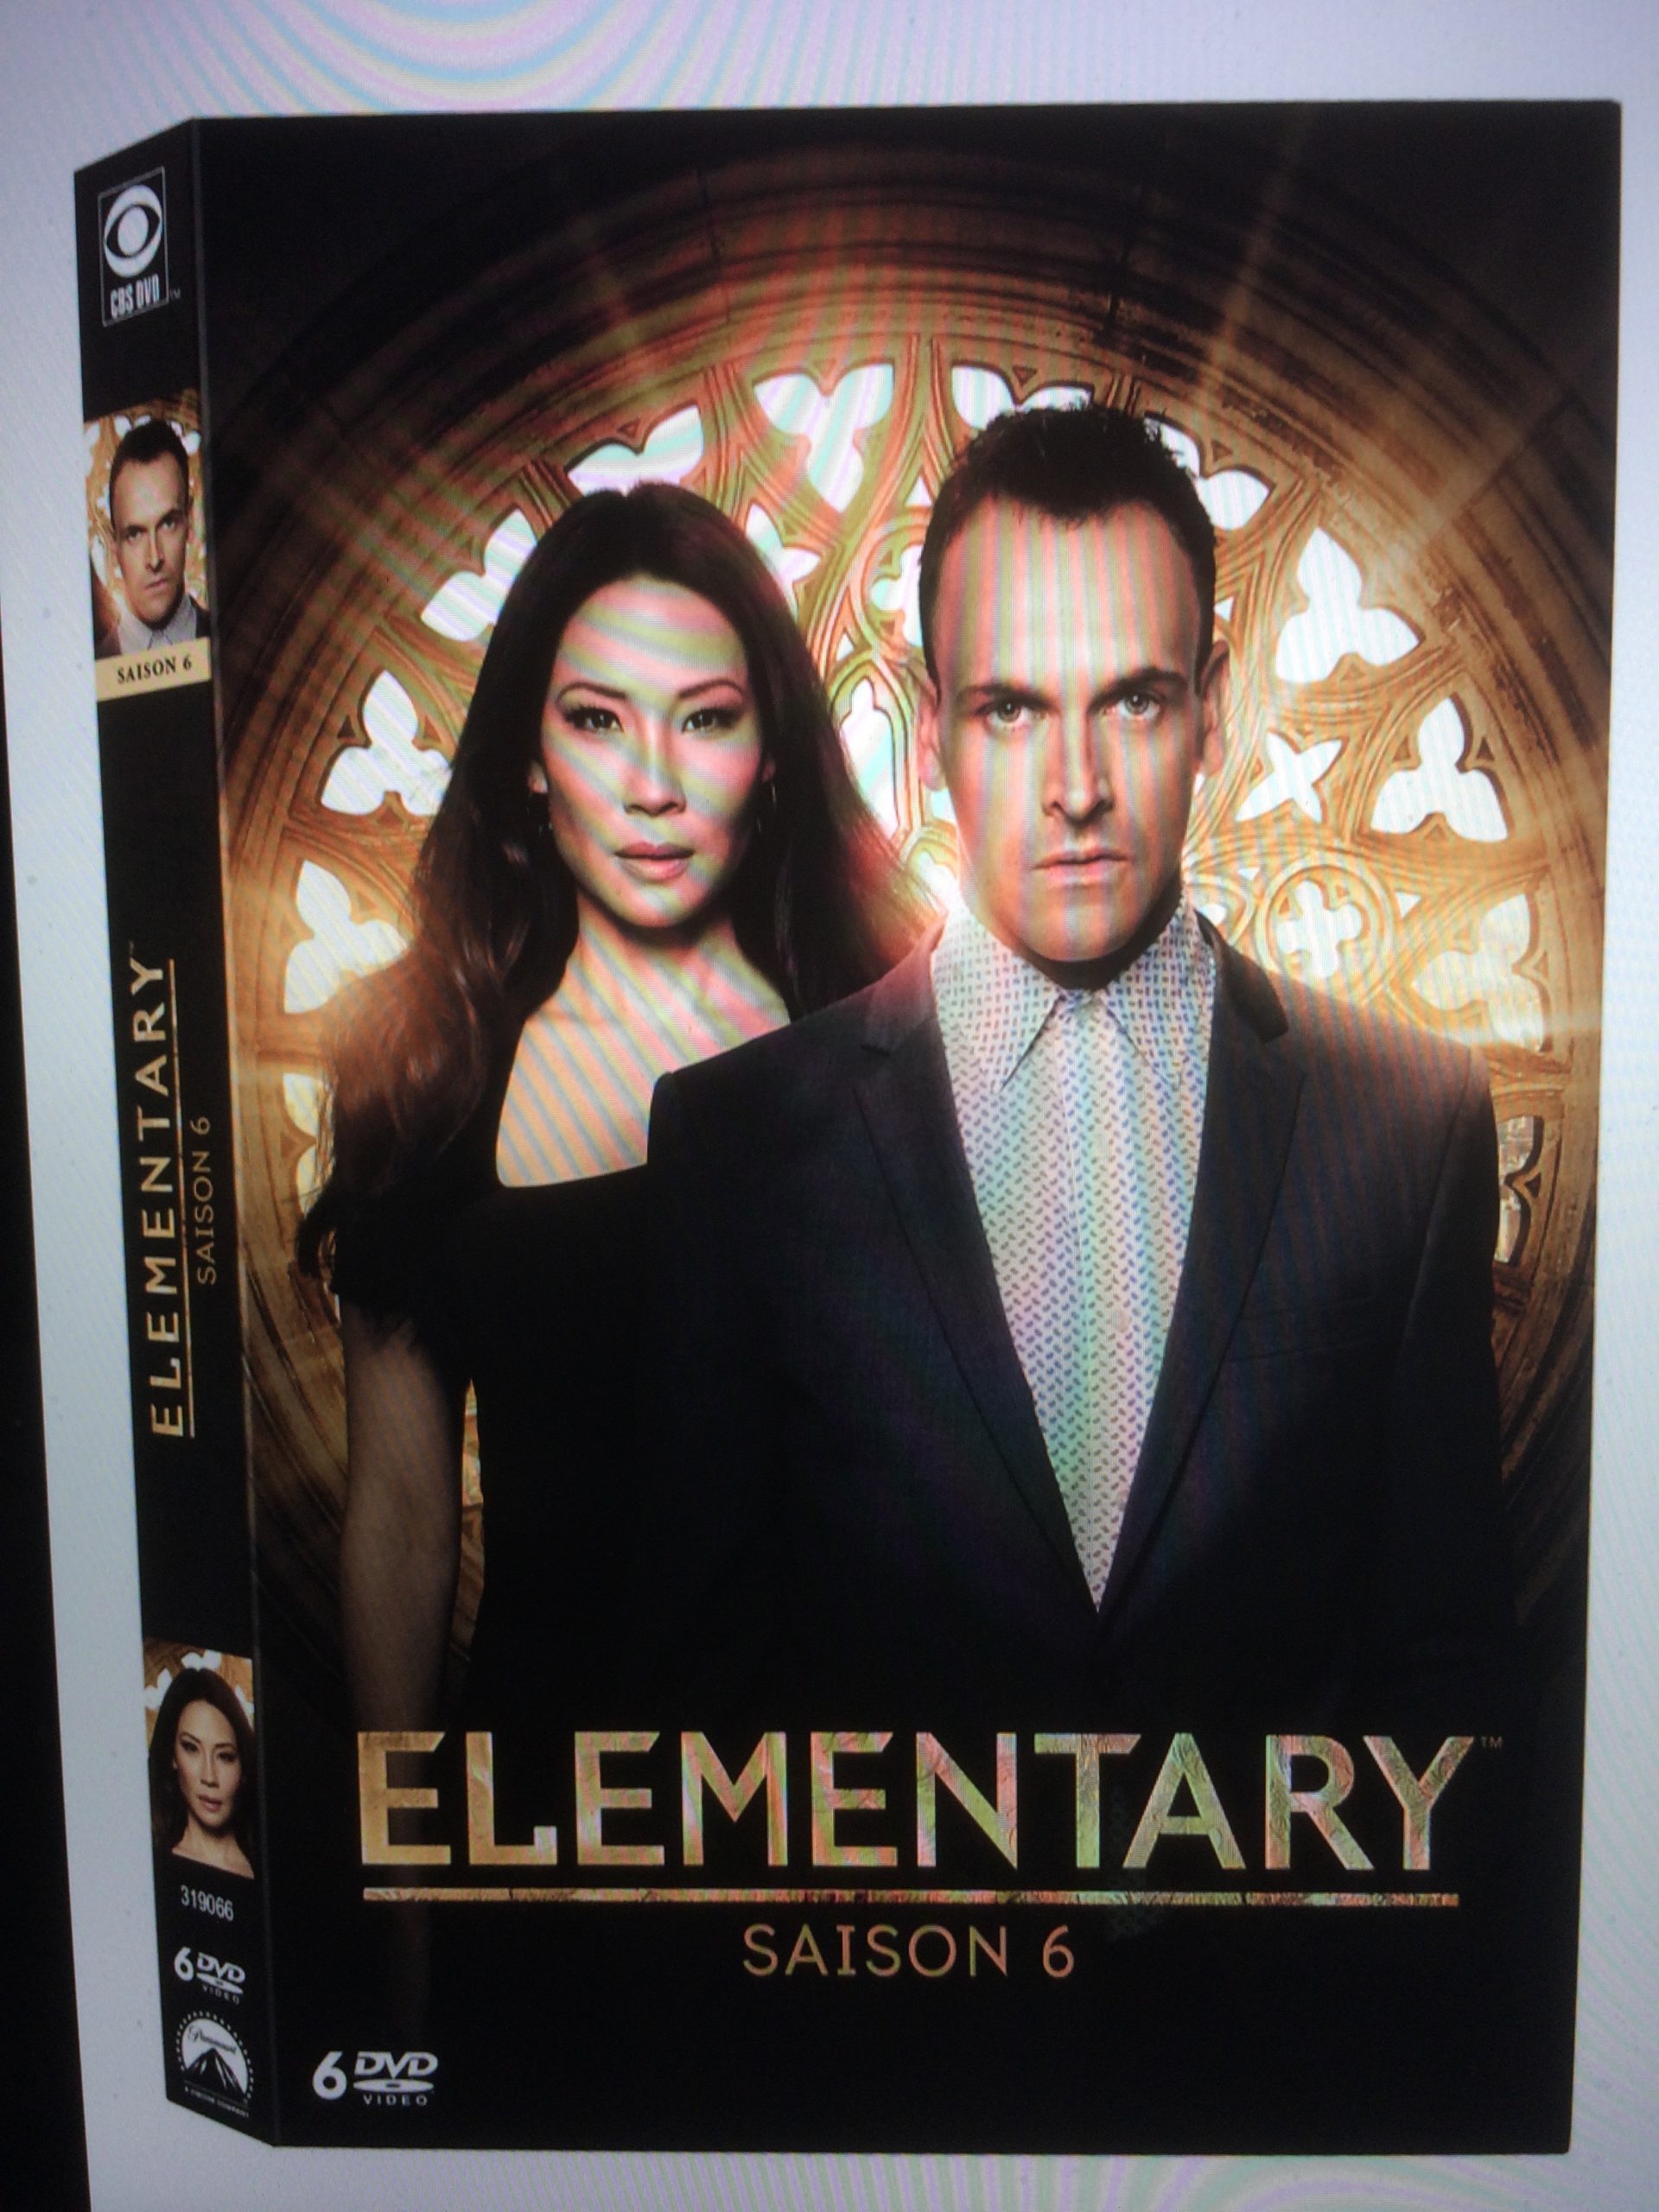 The Elementary